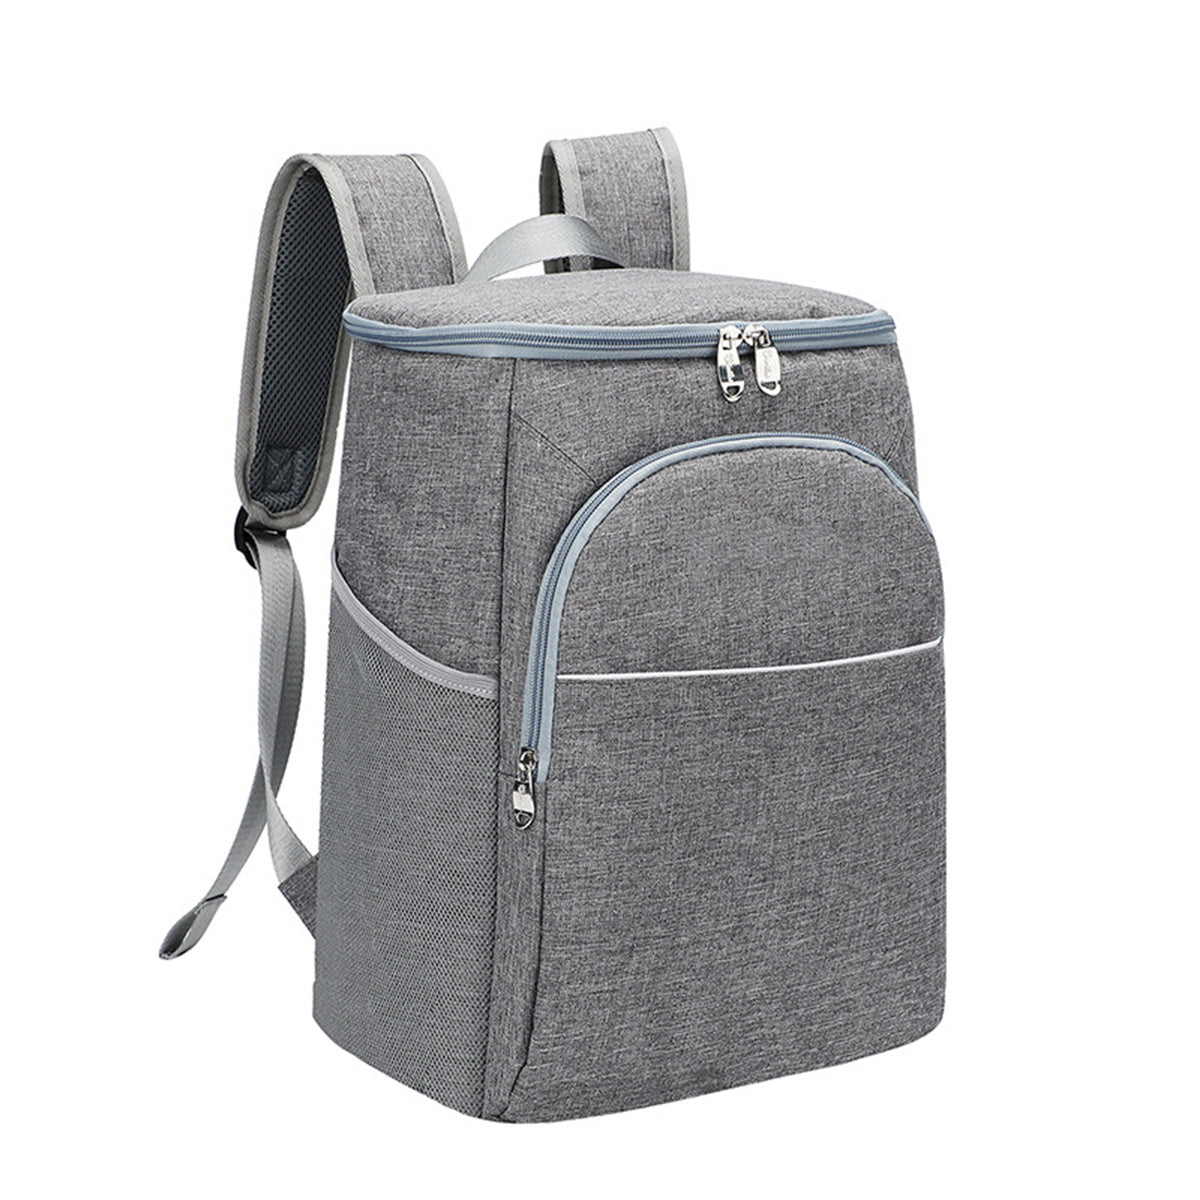 Insulated and Leak-Proof Picnic Bag With Thick Shoulders